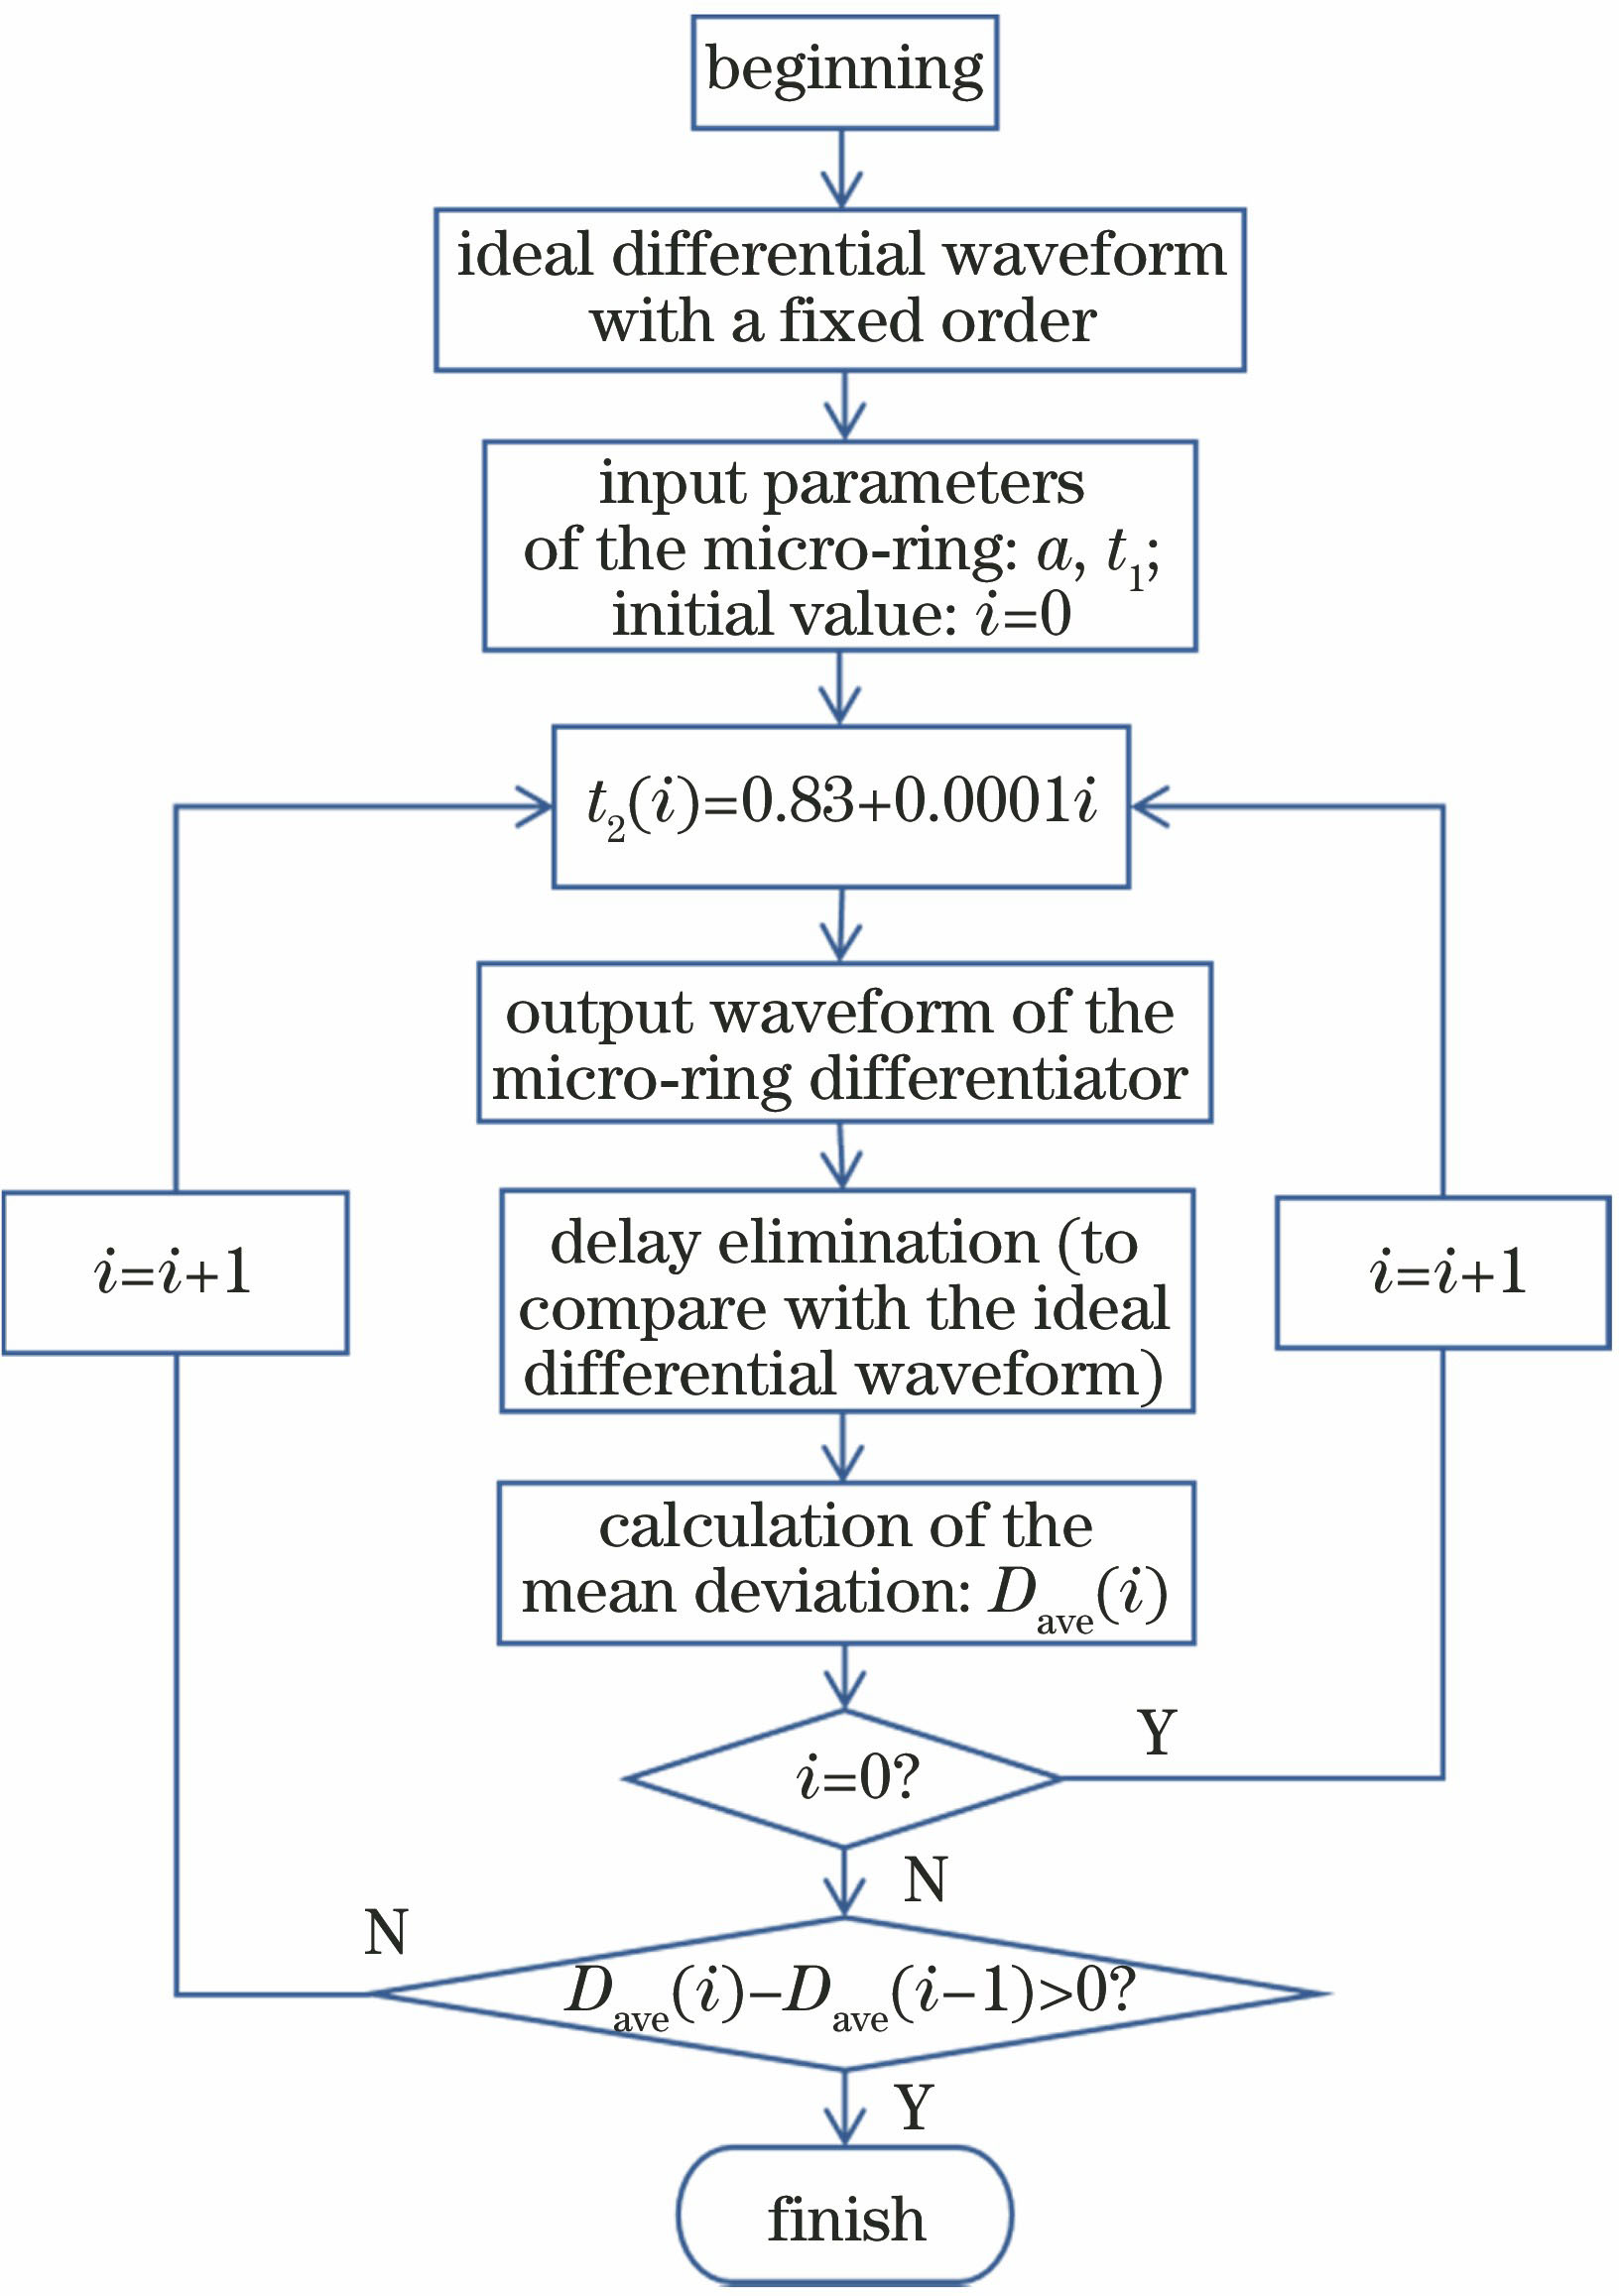 Specific process of the optimization method